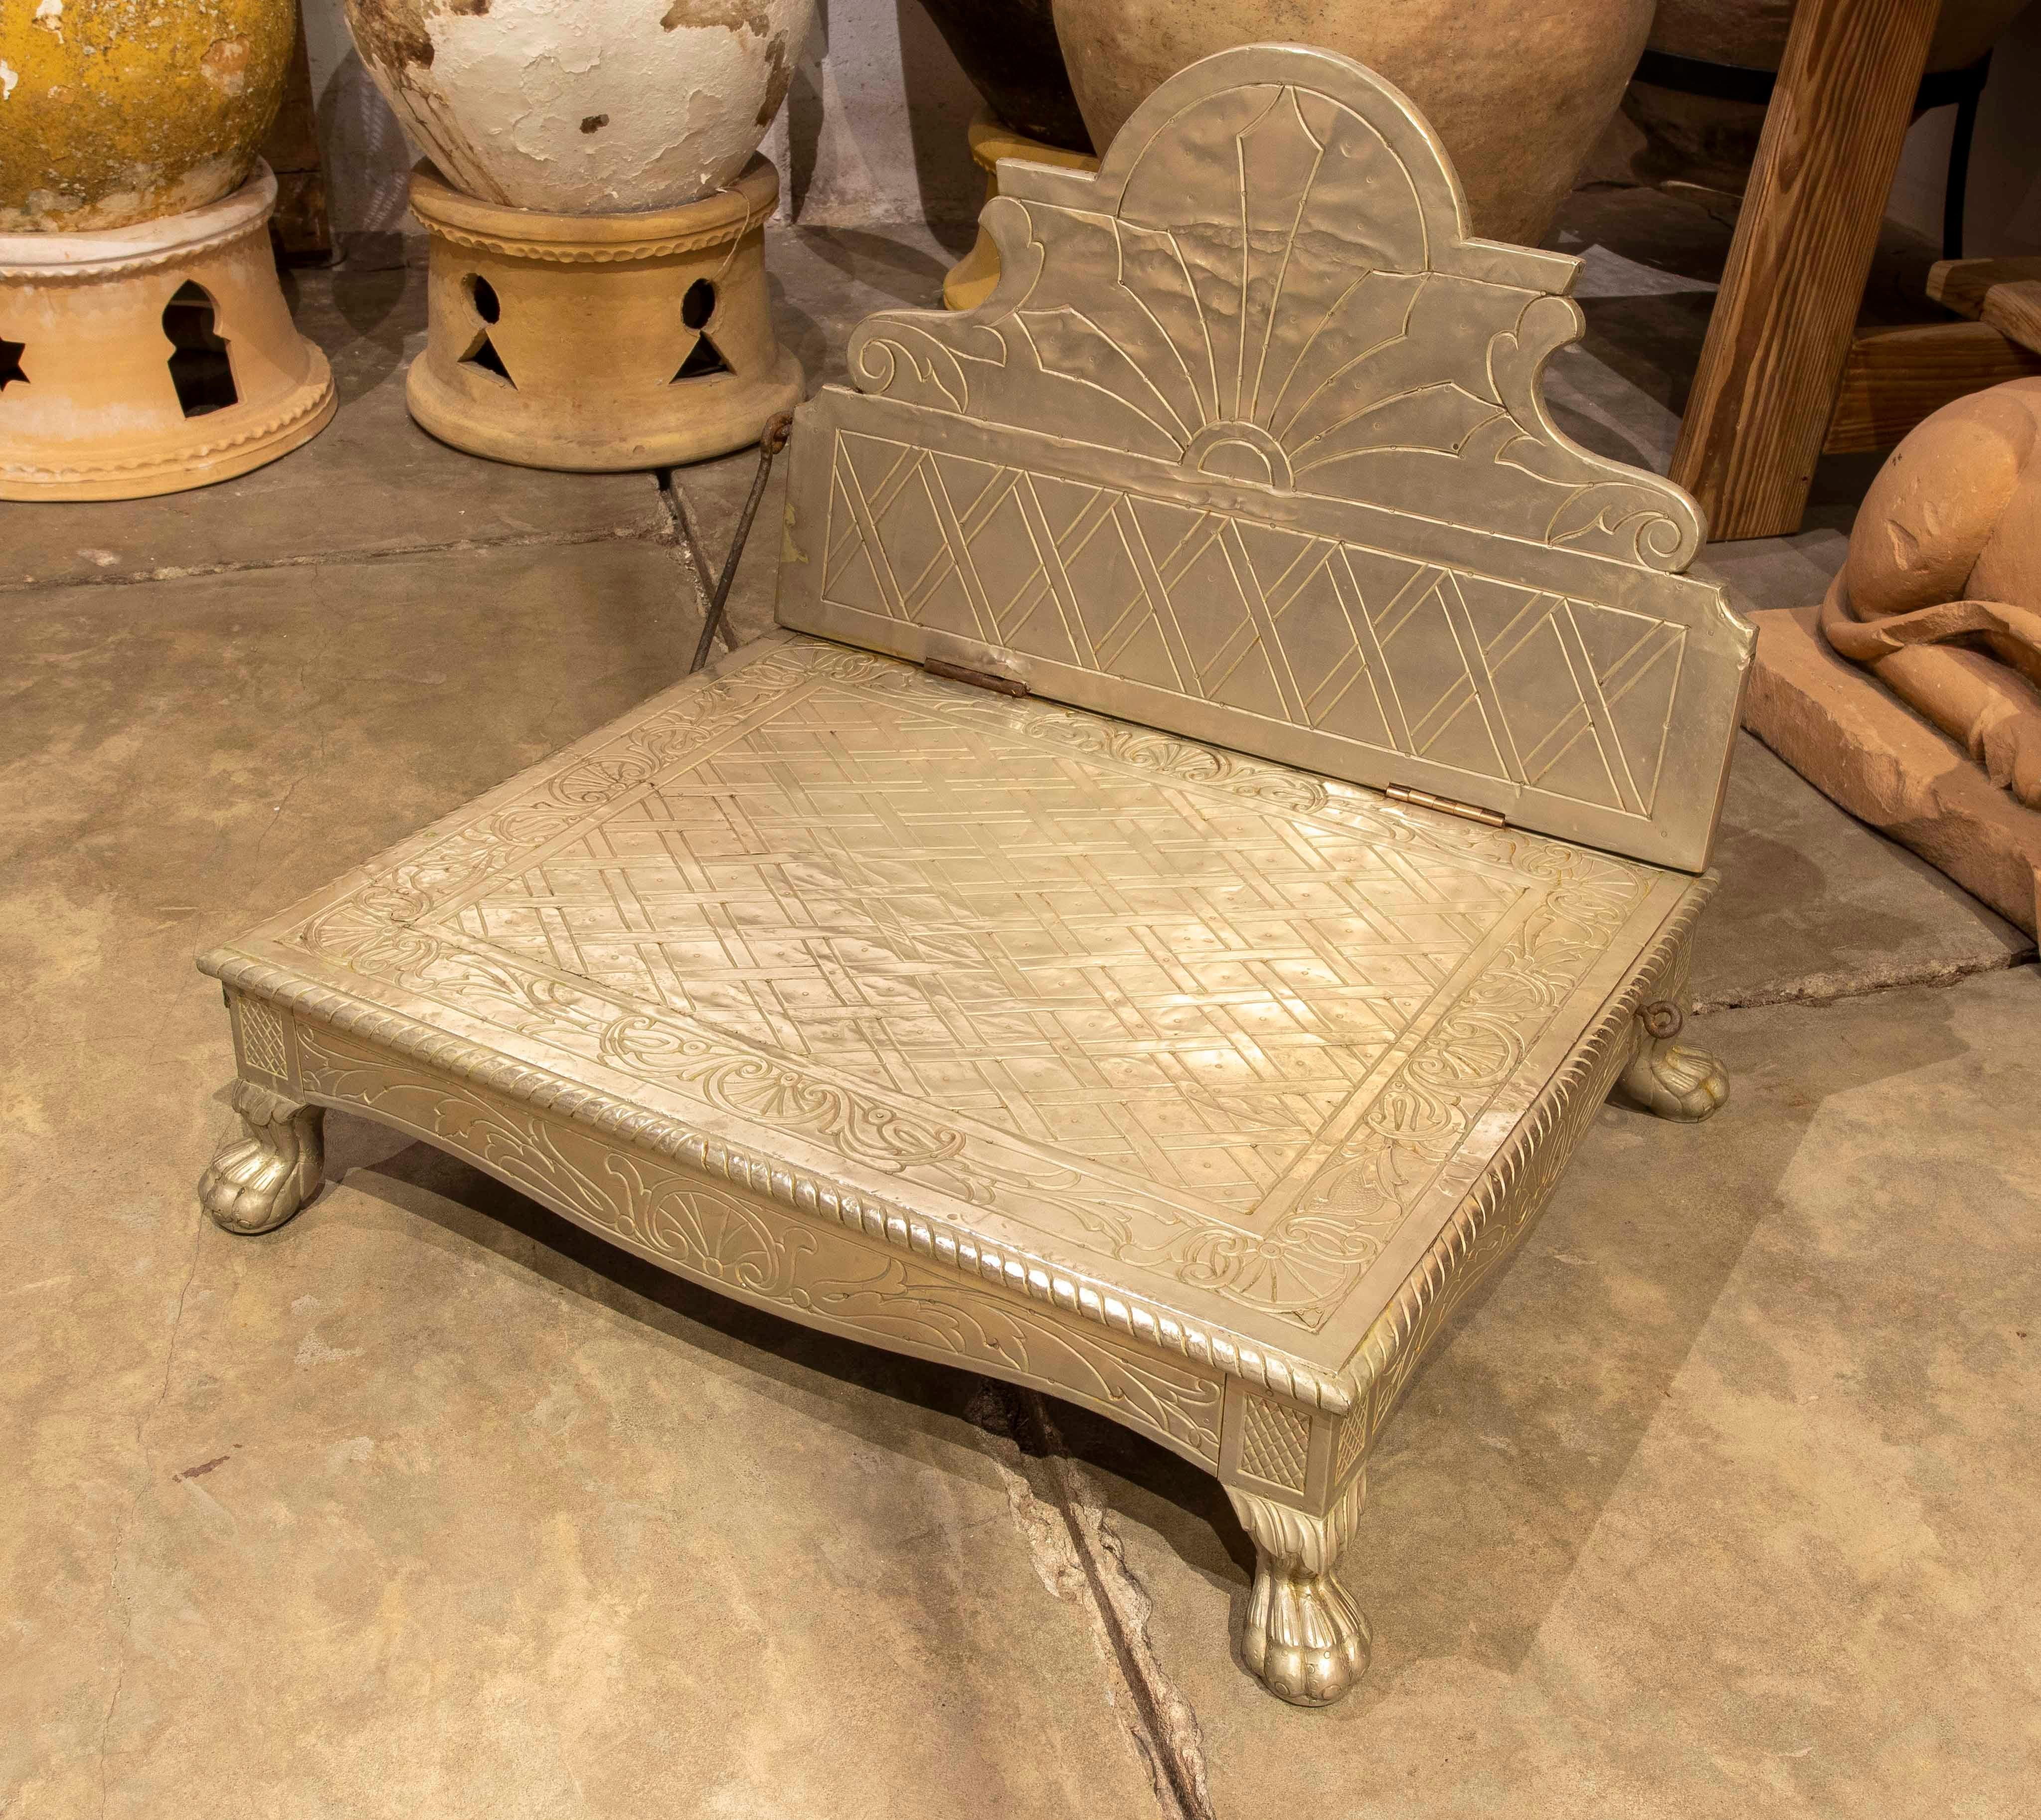 20th Century Indian Decorated Metal Veneered Wooden Chair with Reclining Backrest For Sale